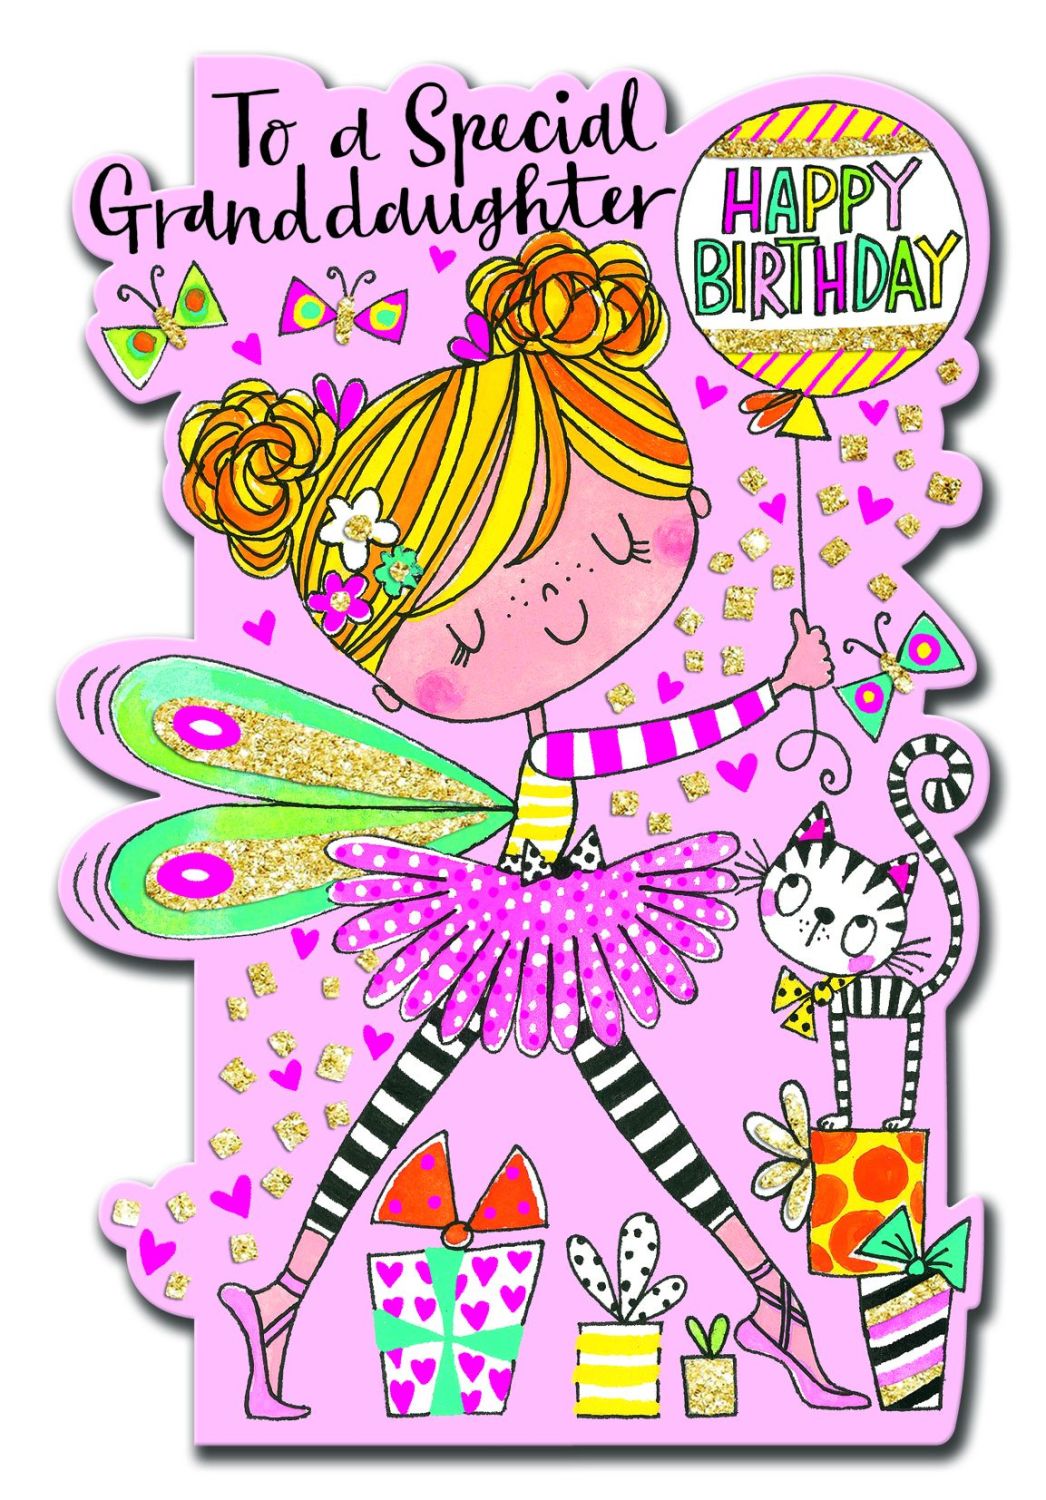 Free Printable Birthday Cards For Granddaughter Free Printable Card Photos